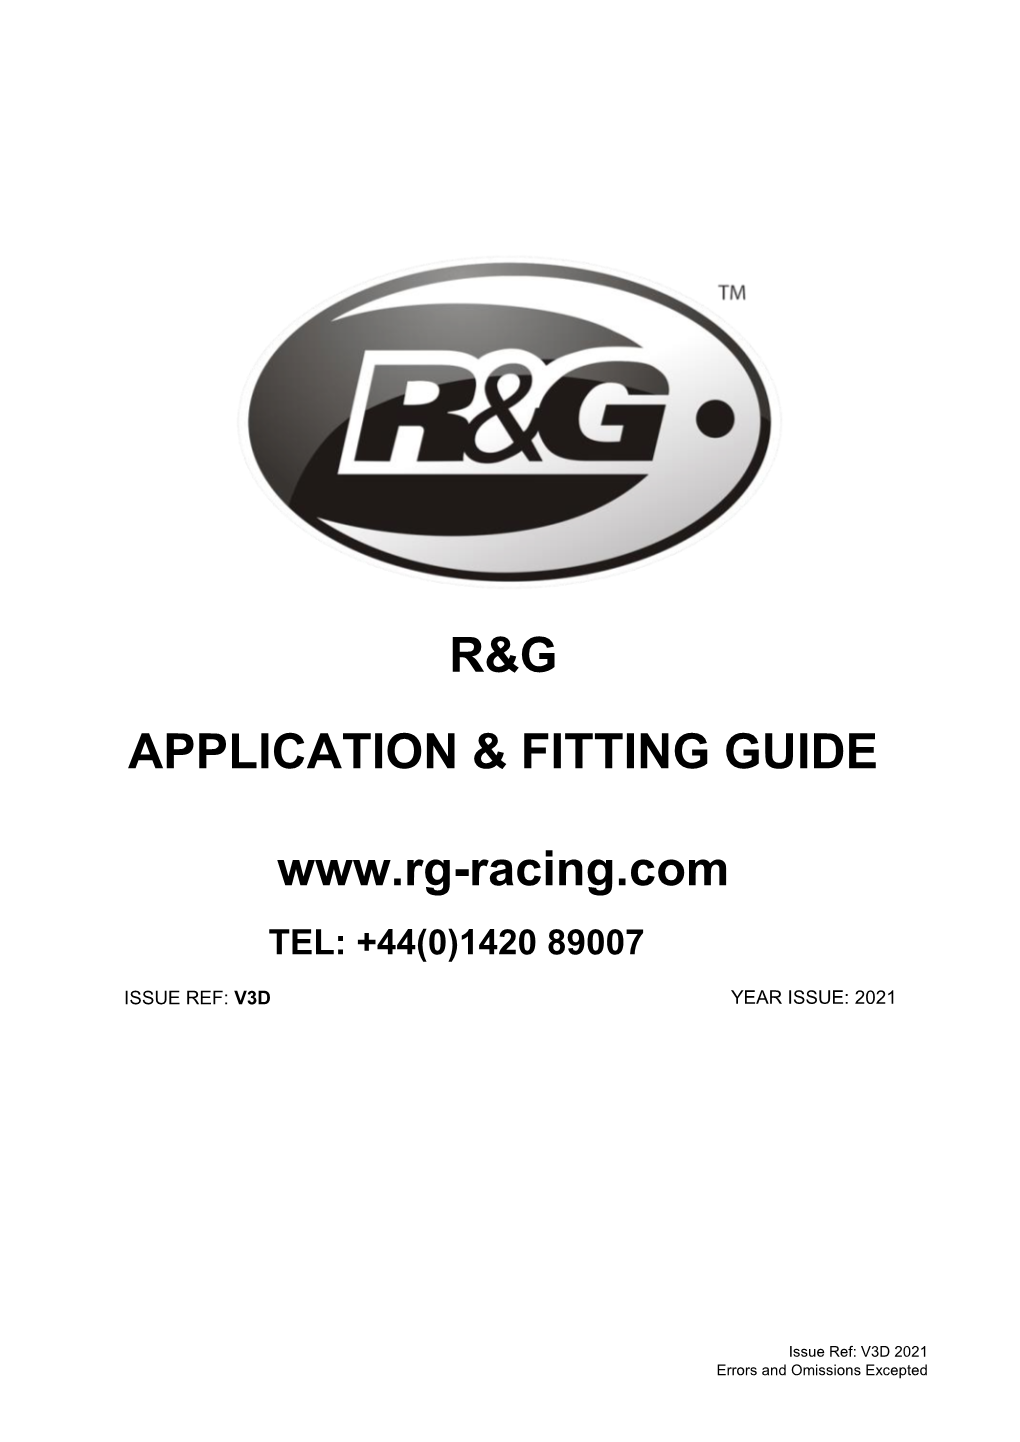 R&G Application & Fitting Guide